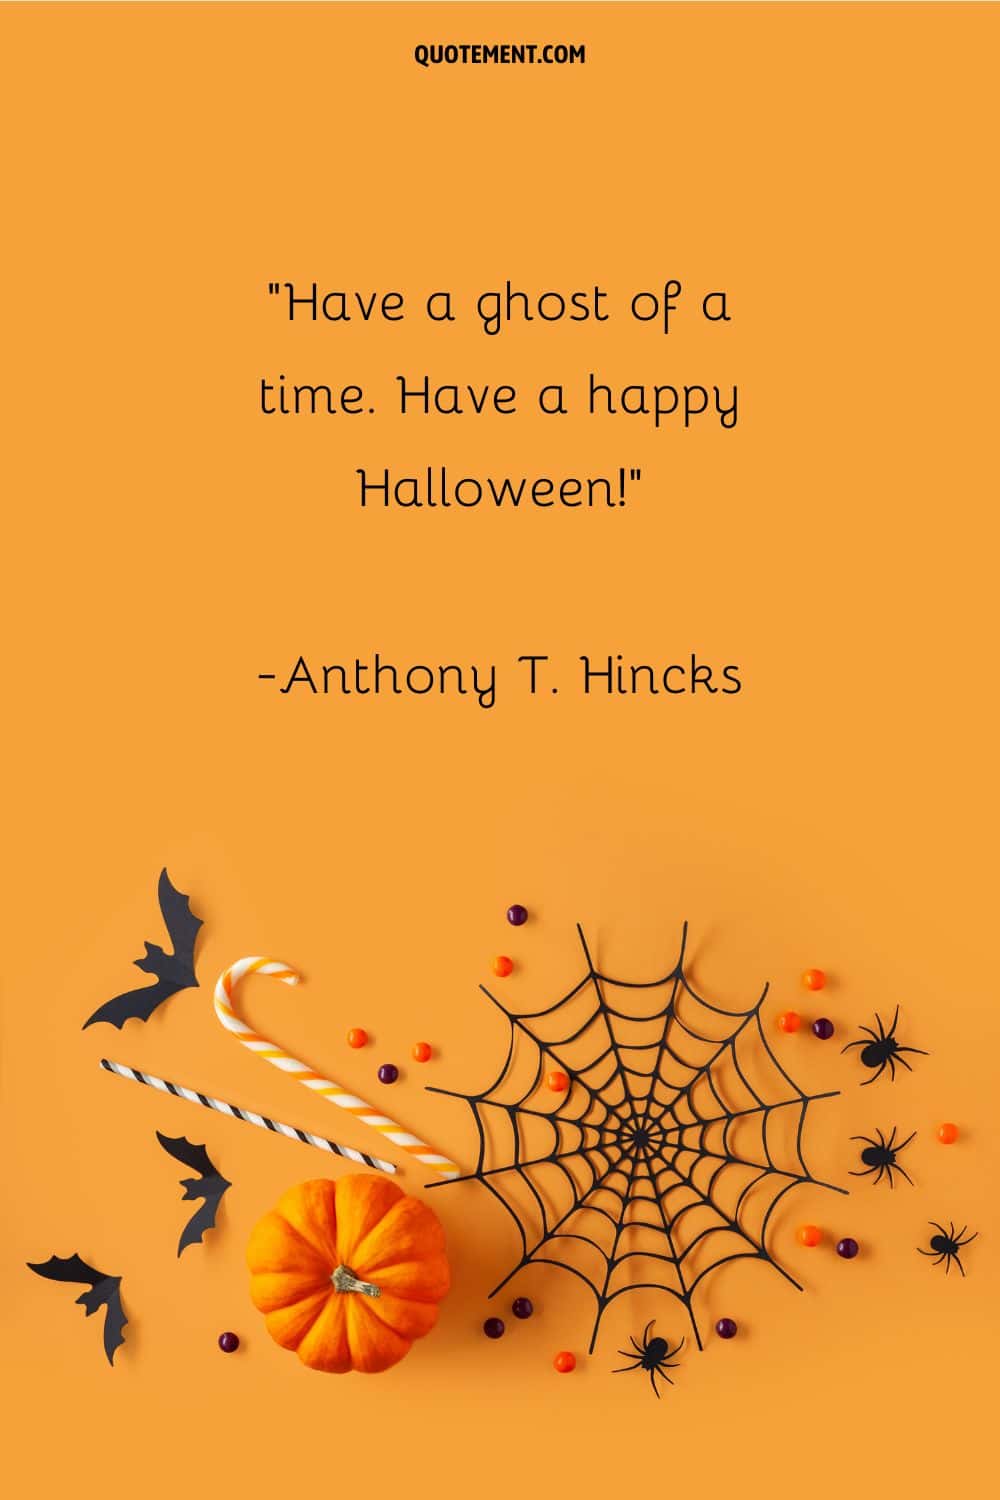 Have a ghost of a time. Have a happy Halloween